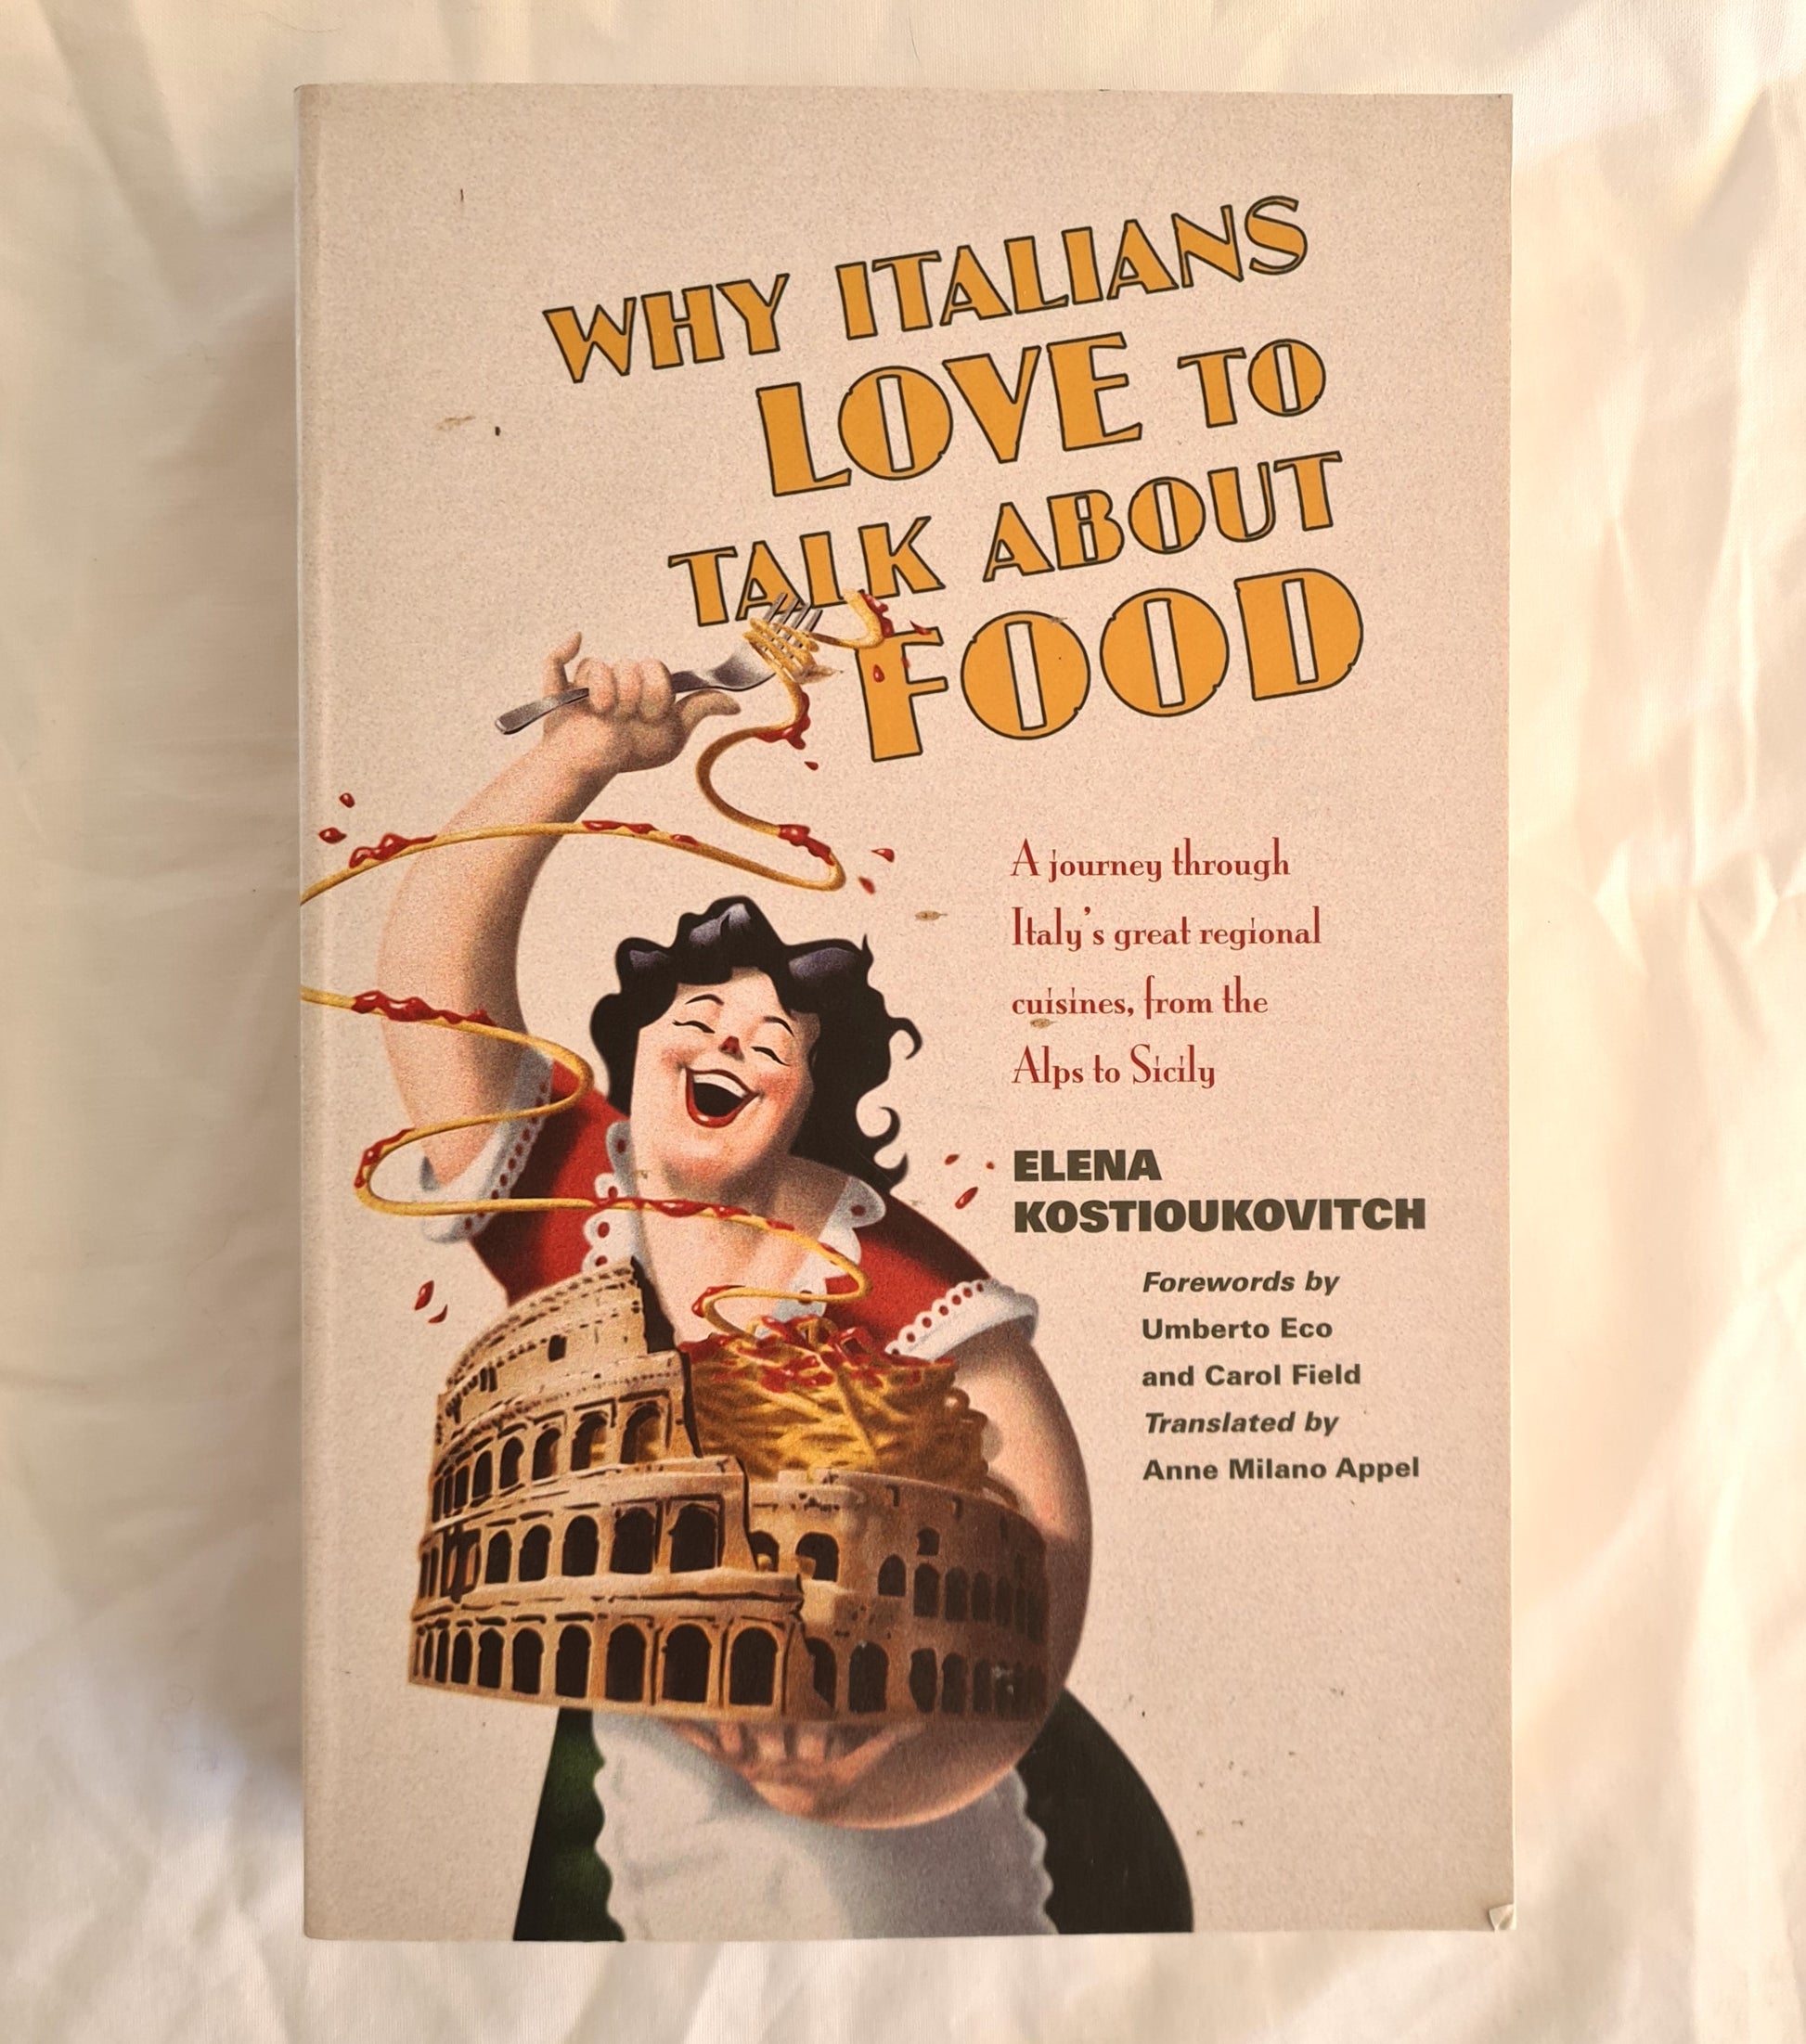 Why Italians Love to Talk About Food  by Elena Kostioukovitch